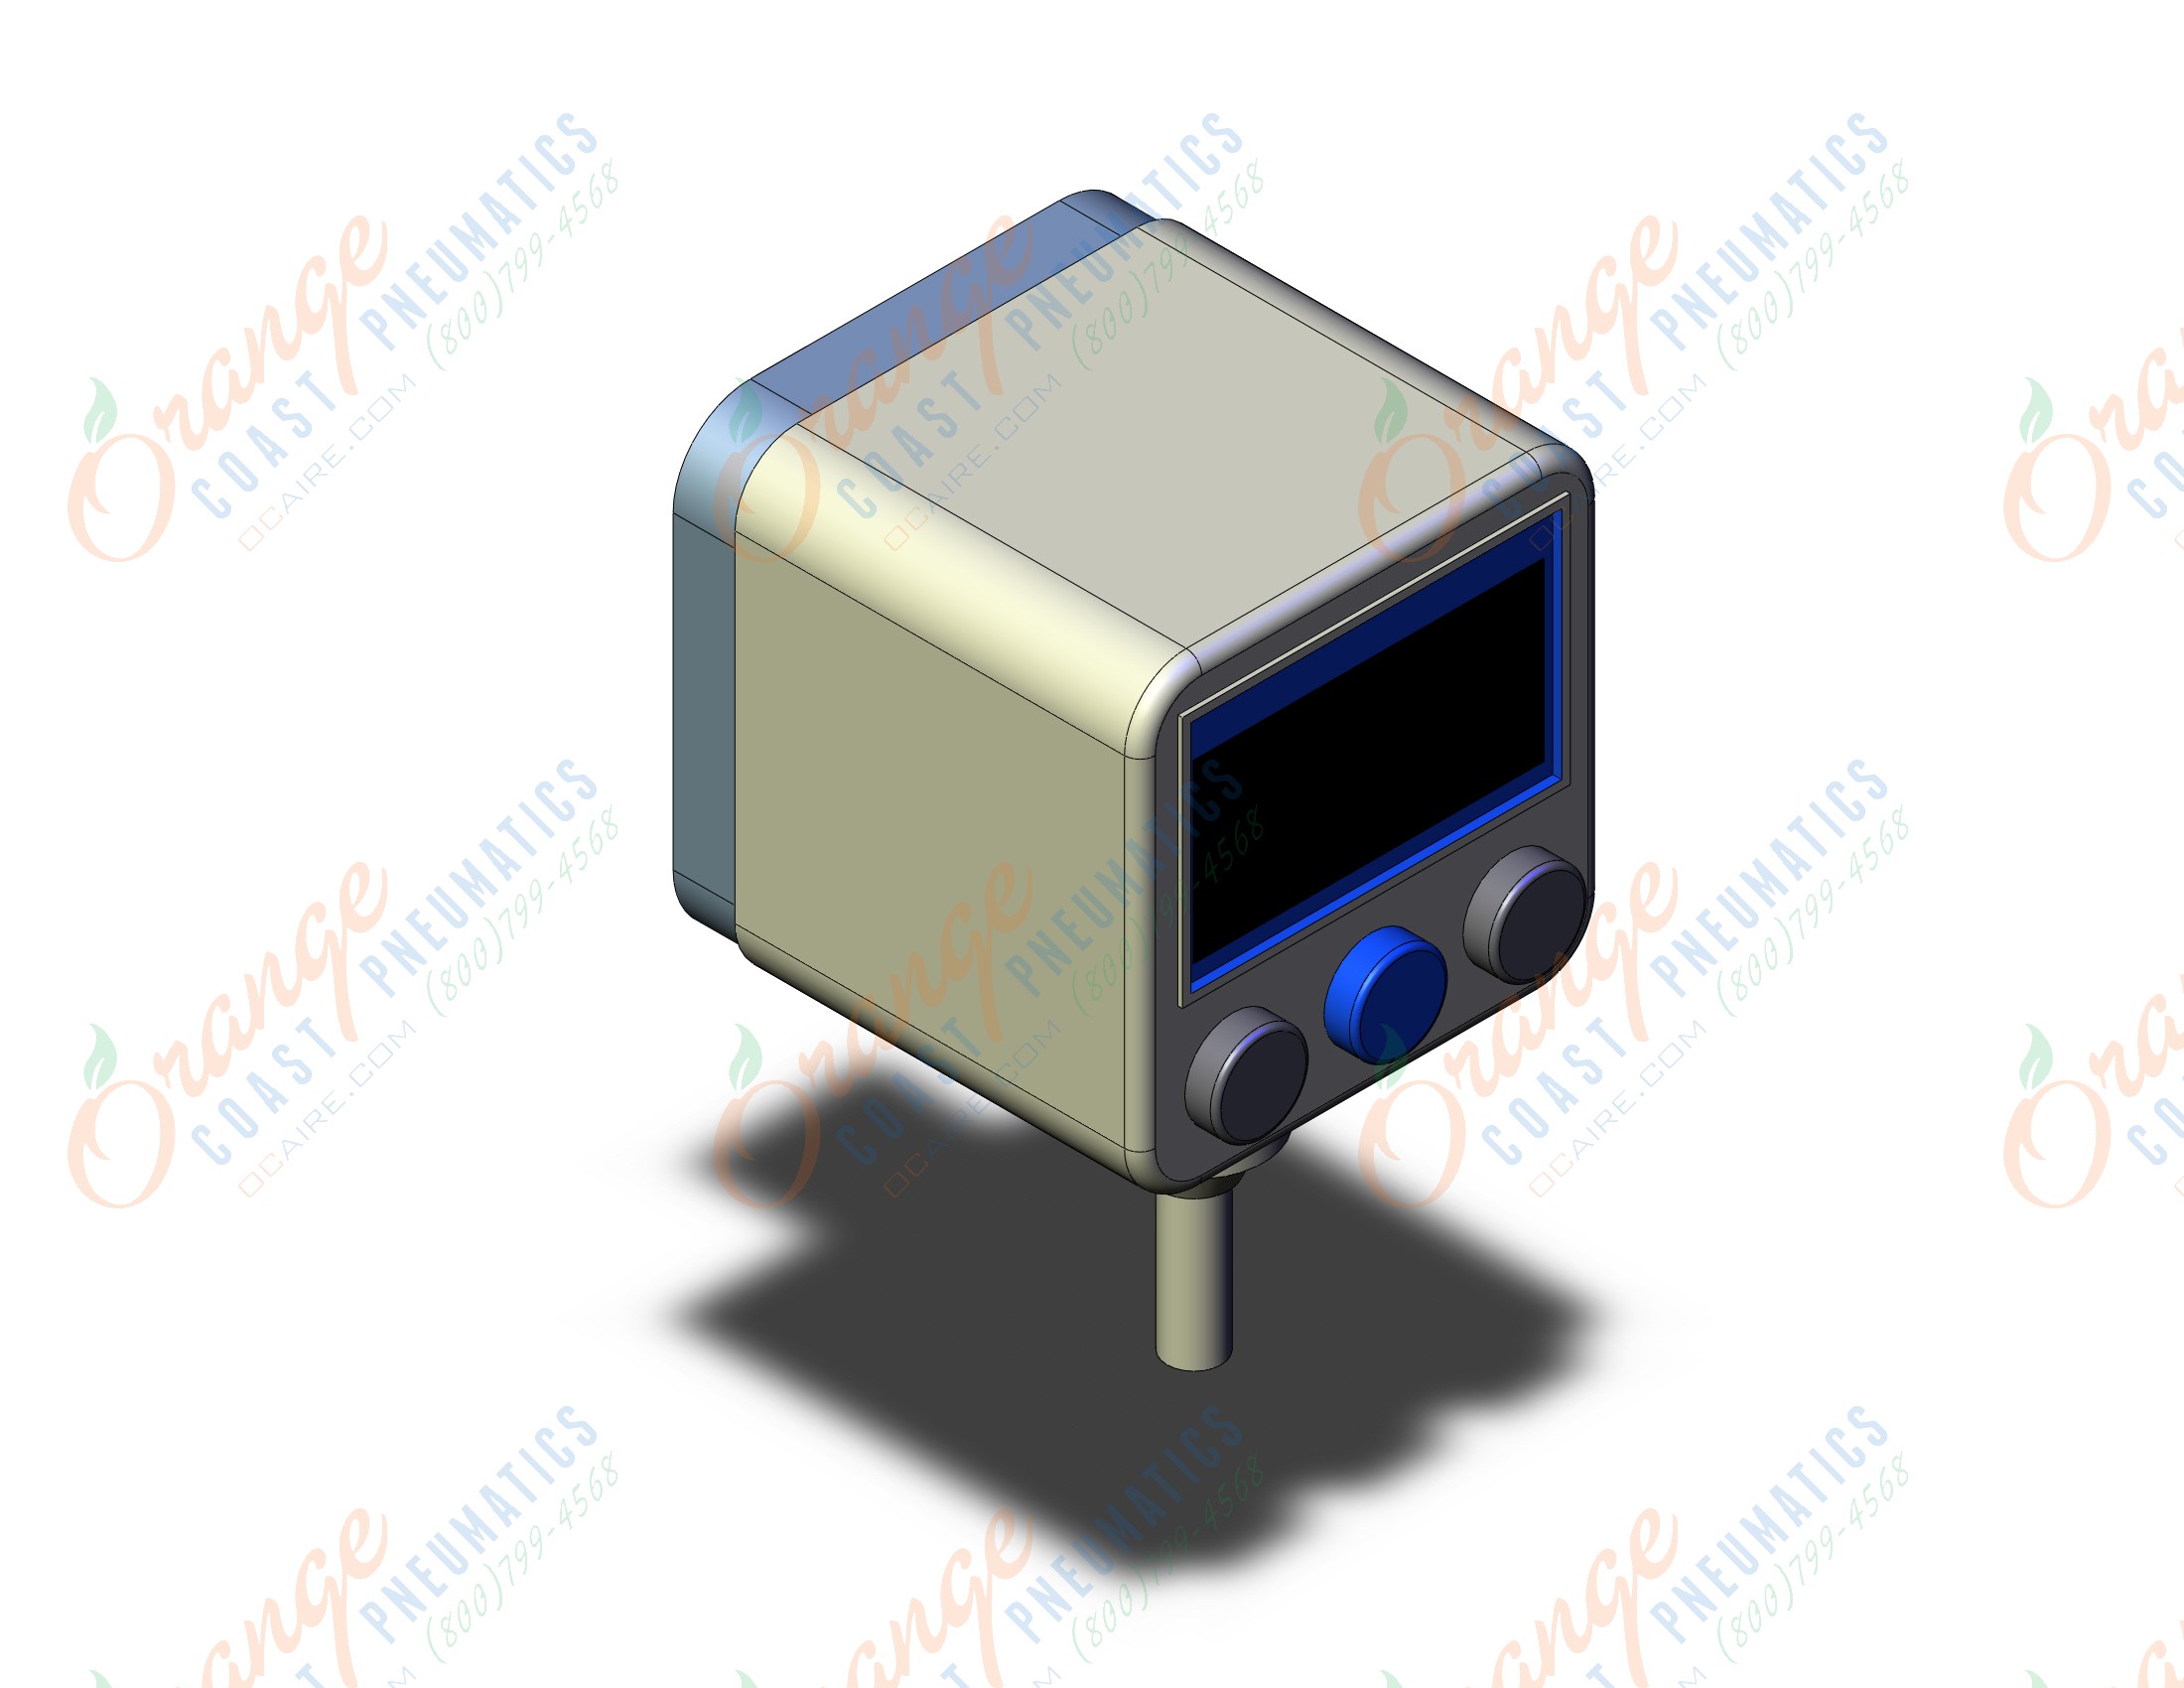 SMC ISE40A-W1-R-MK-X501 2-color hi precision dig pres switch, PRESSURE SWITCH, ISE40, ISE40A